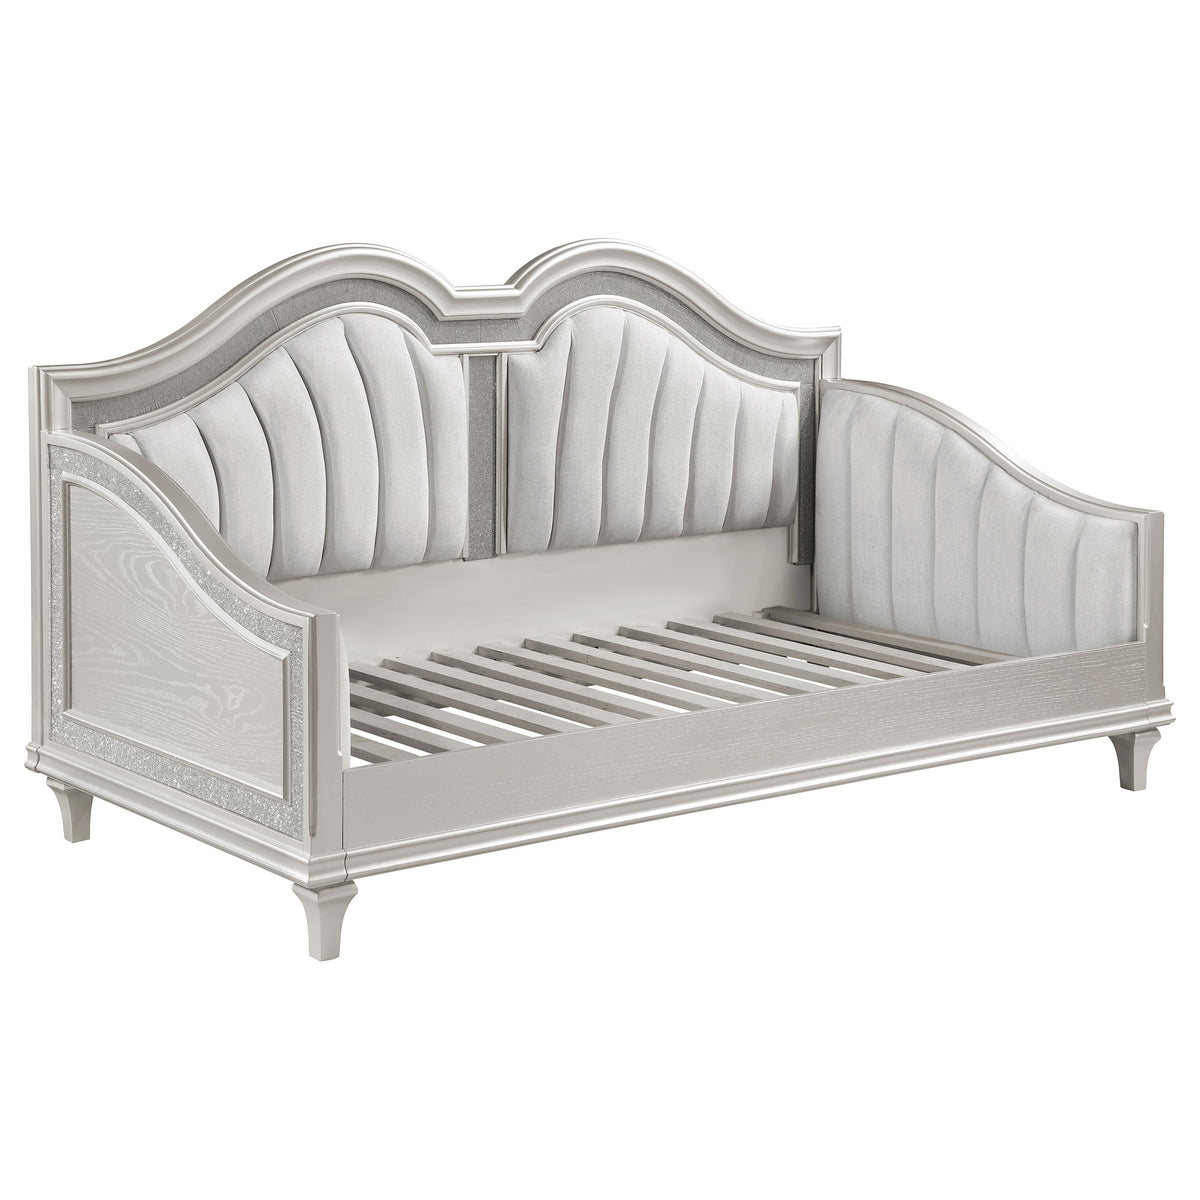 Evangeline Upholstered Twin Daybed with Faux Diamond Trim Silver and Ivory Evangeline Upholstered Twin Daybed with Faux Diamond Trim Silver and Ivory 